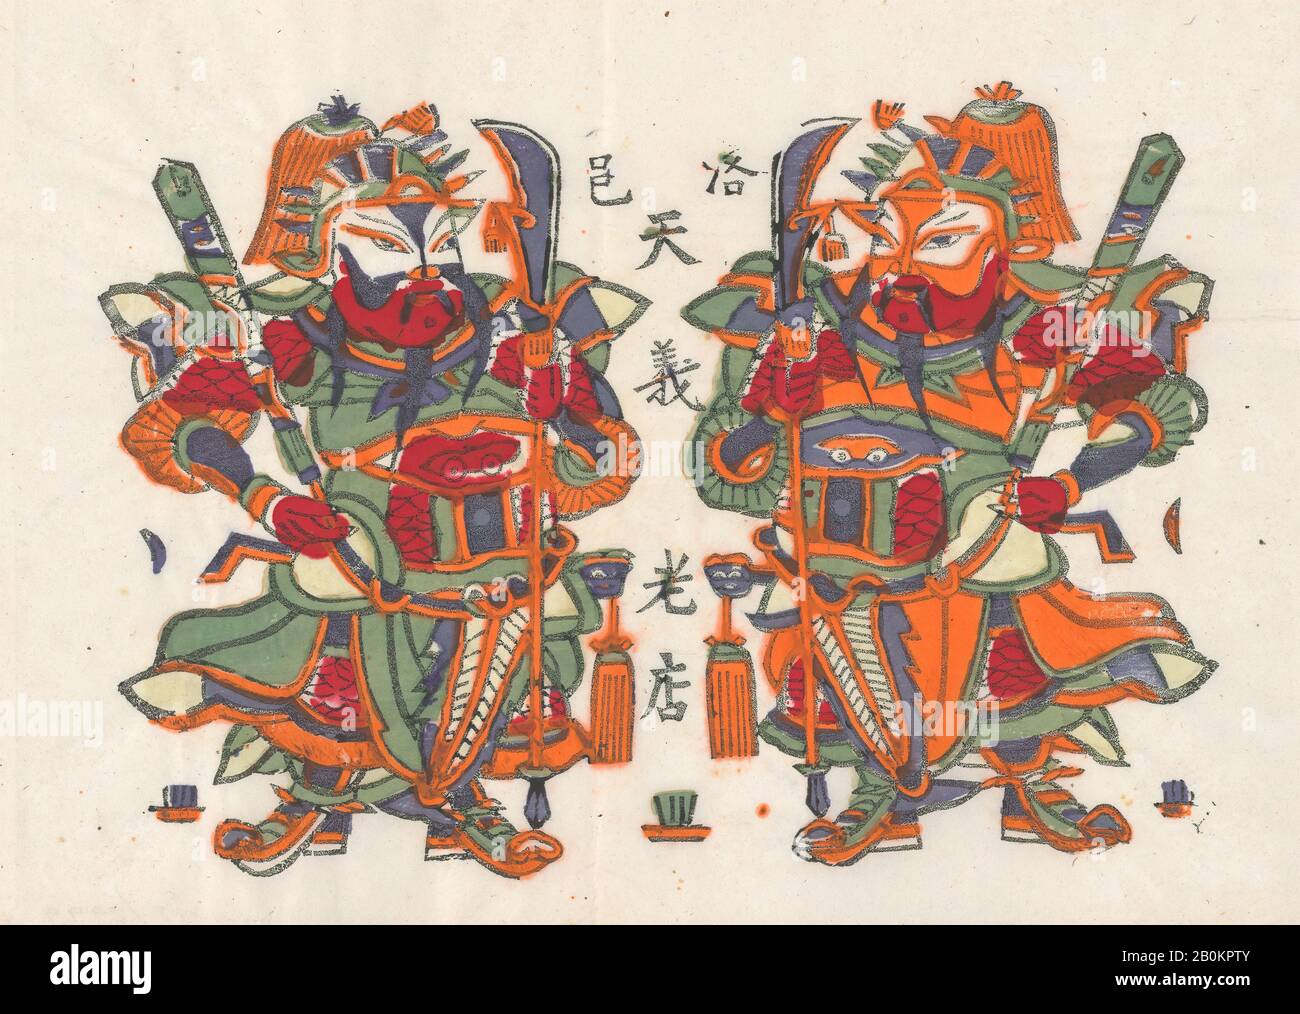 One hundred thirty-five woodblock prints including New Year's pictures (nianhua), door gods, historical figures and Taoist deities, China, 19th–20th century, China, Polychrome woodblock print; ink and color on paper, Image: 12 1/2 in. × 15 in. (31.8 × 38.1 cm), Prints Stock Photo